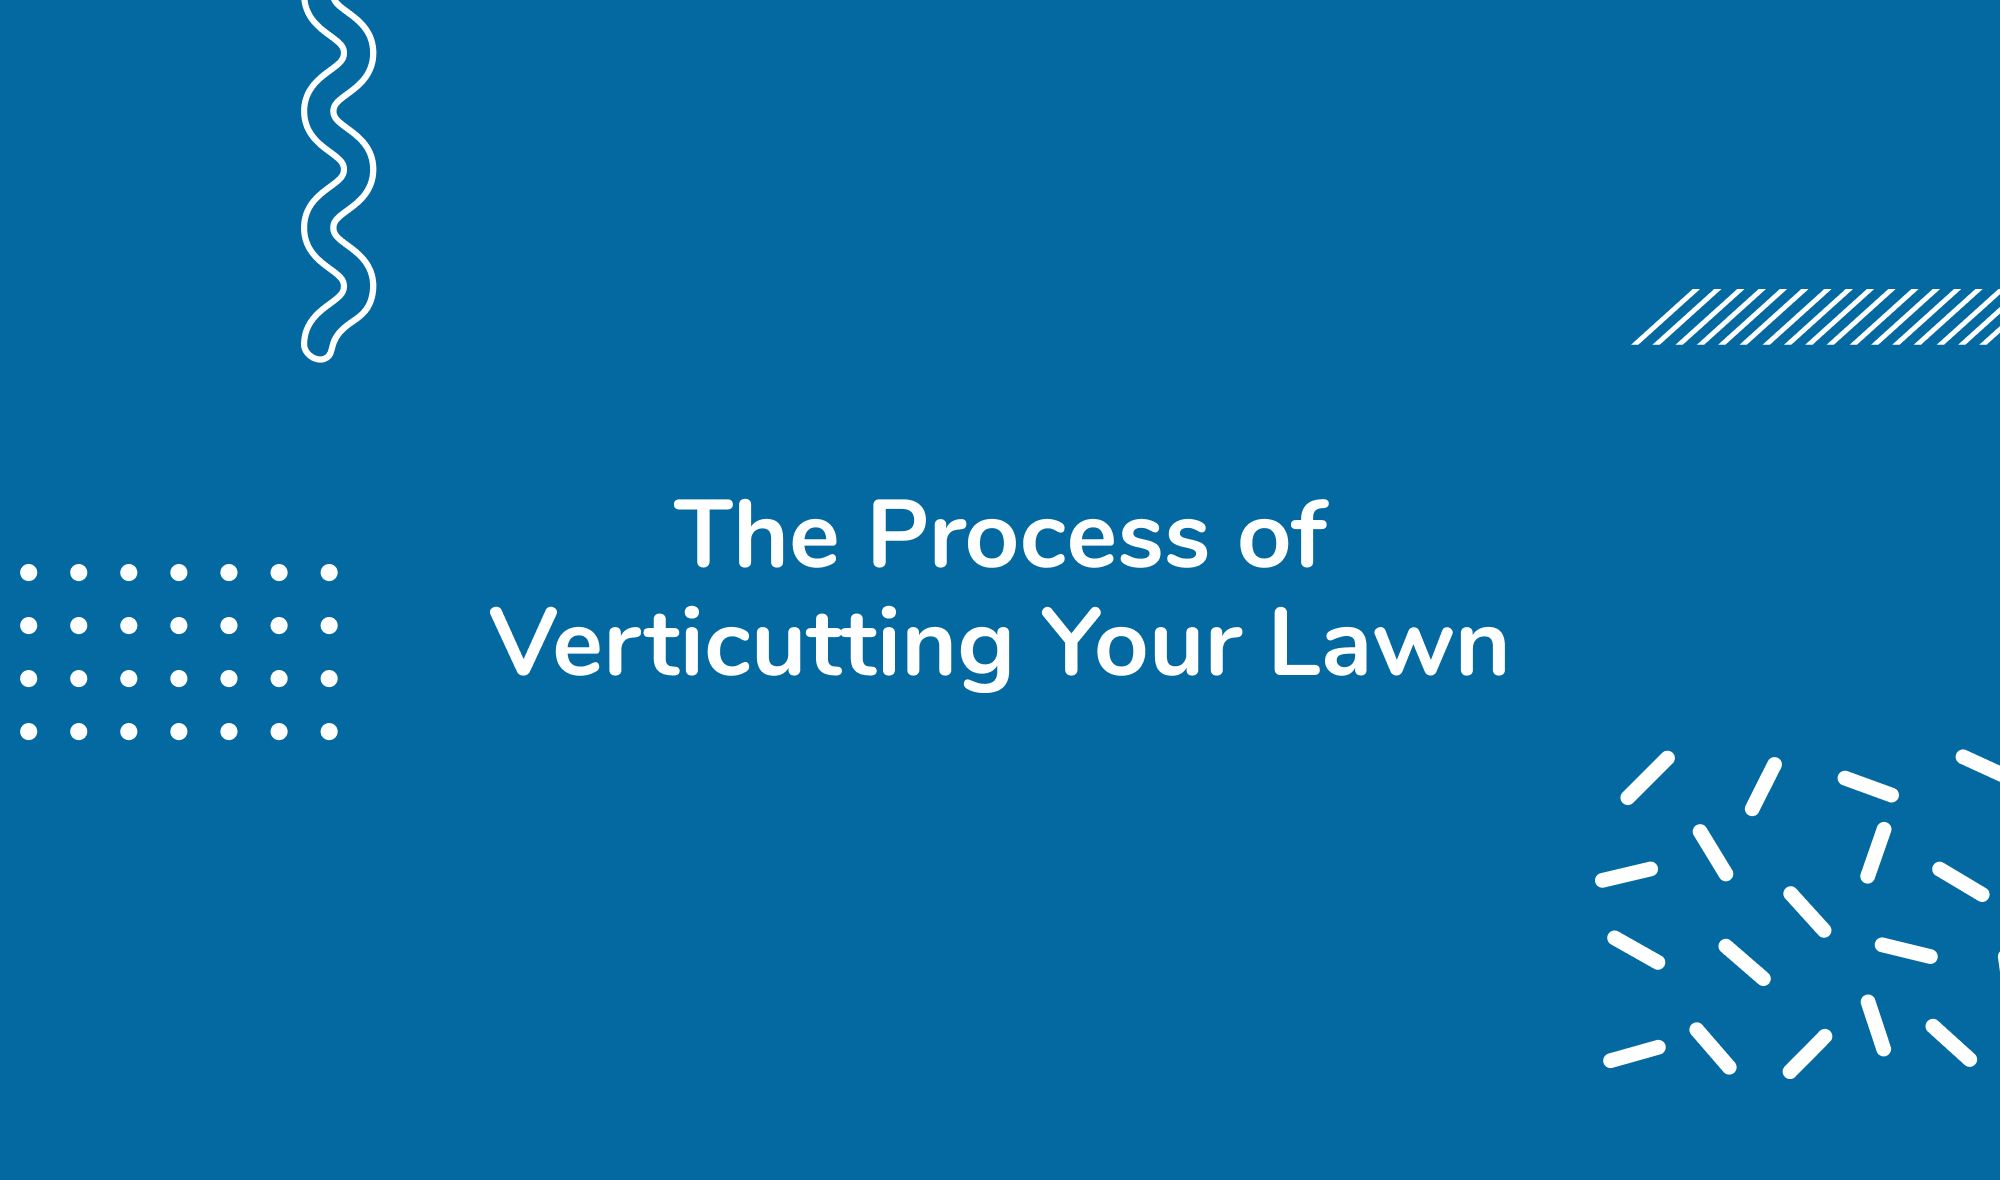 The Process of Verticutting Your Lawn